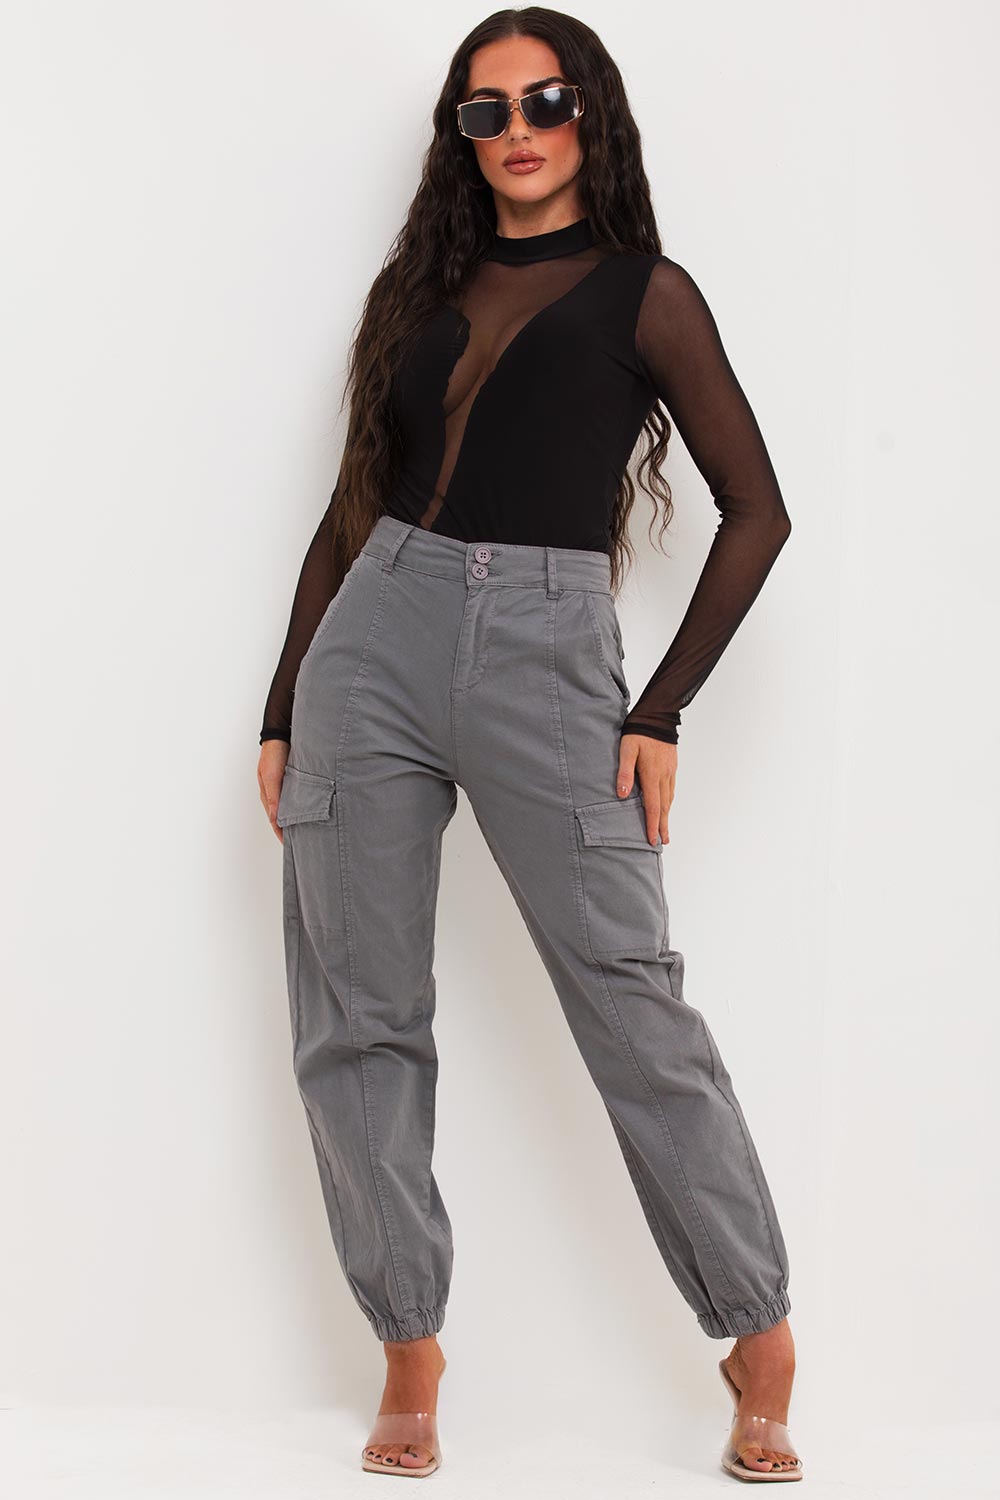 Navy Cuffed Trousers  Women  George at ASDA